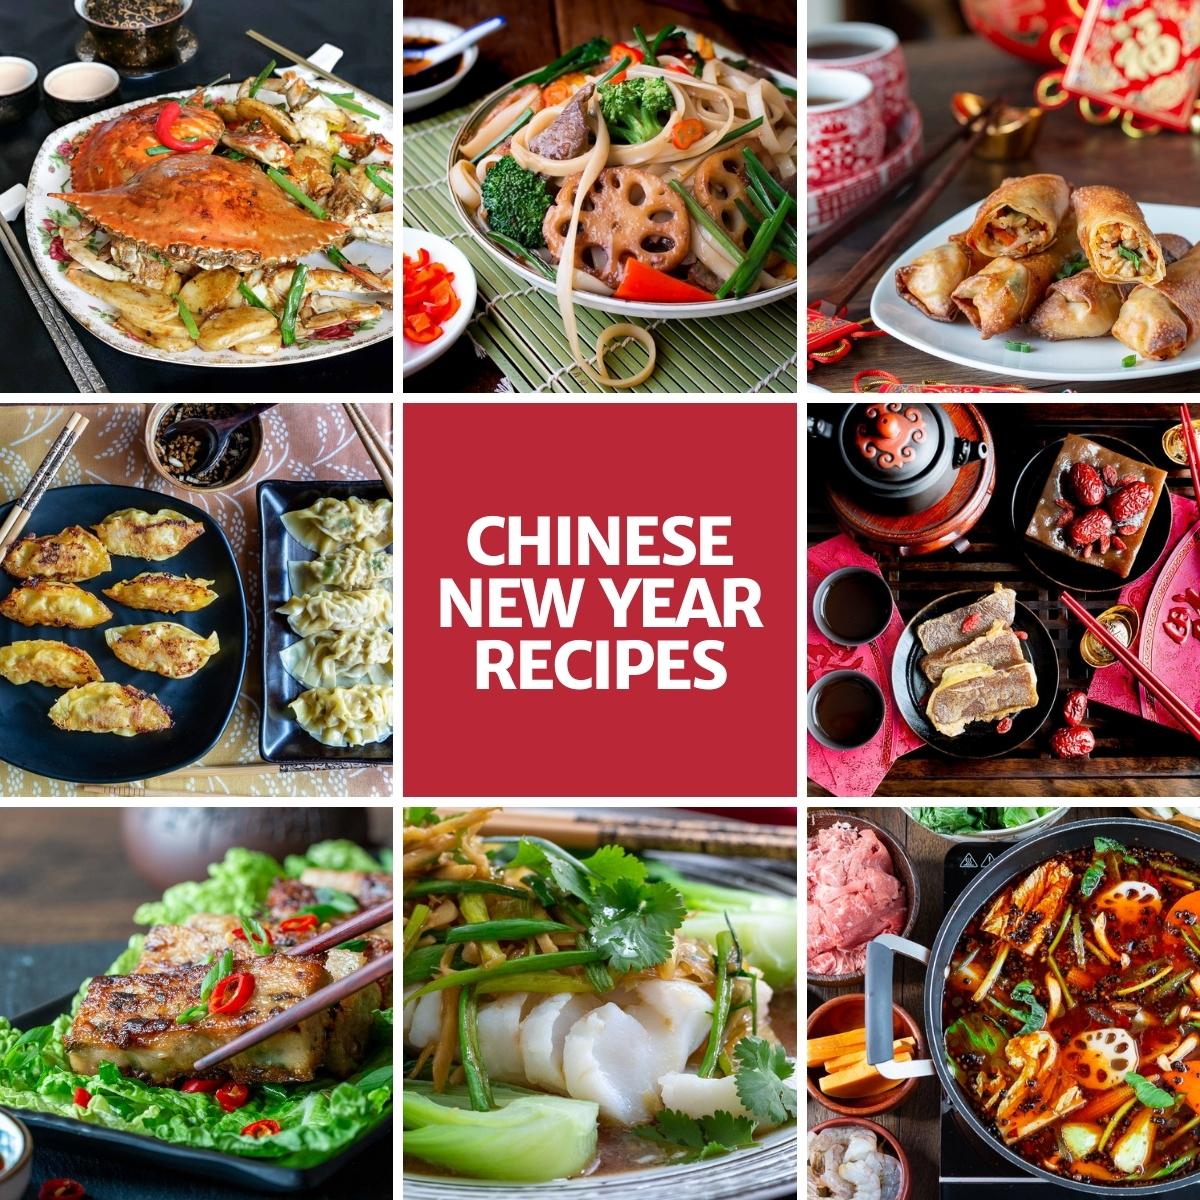 8 photos of our favorite Chinese New Year Recipes in a collage.